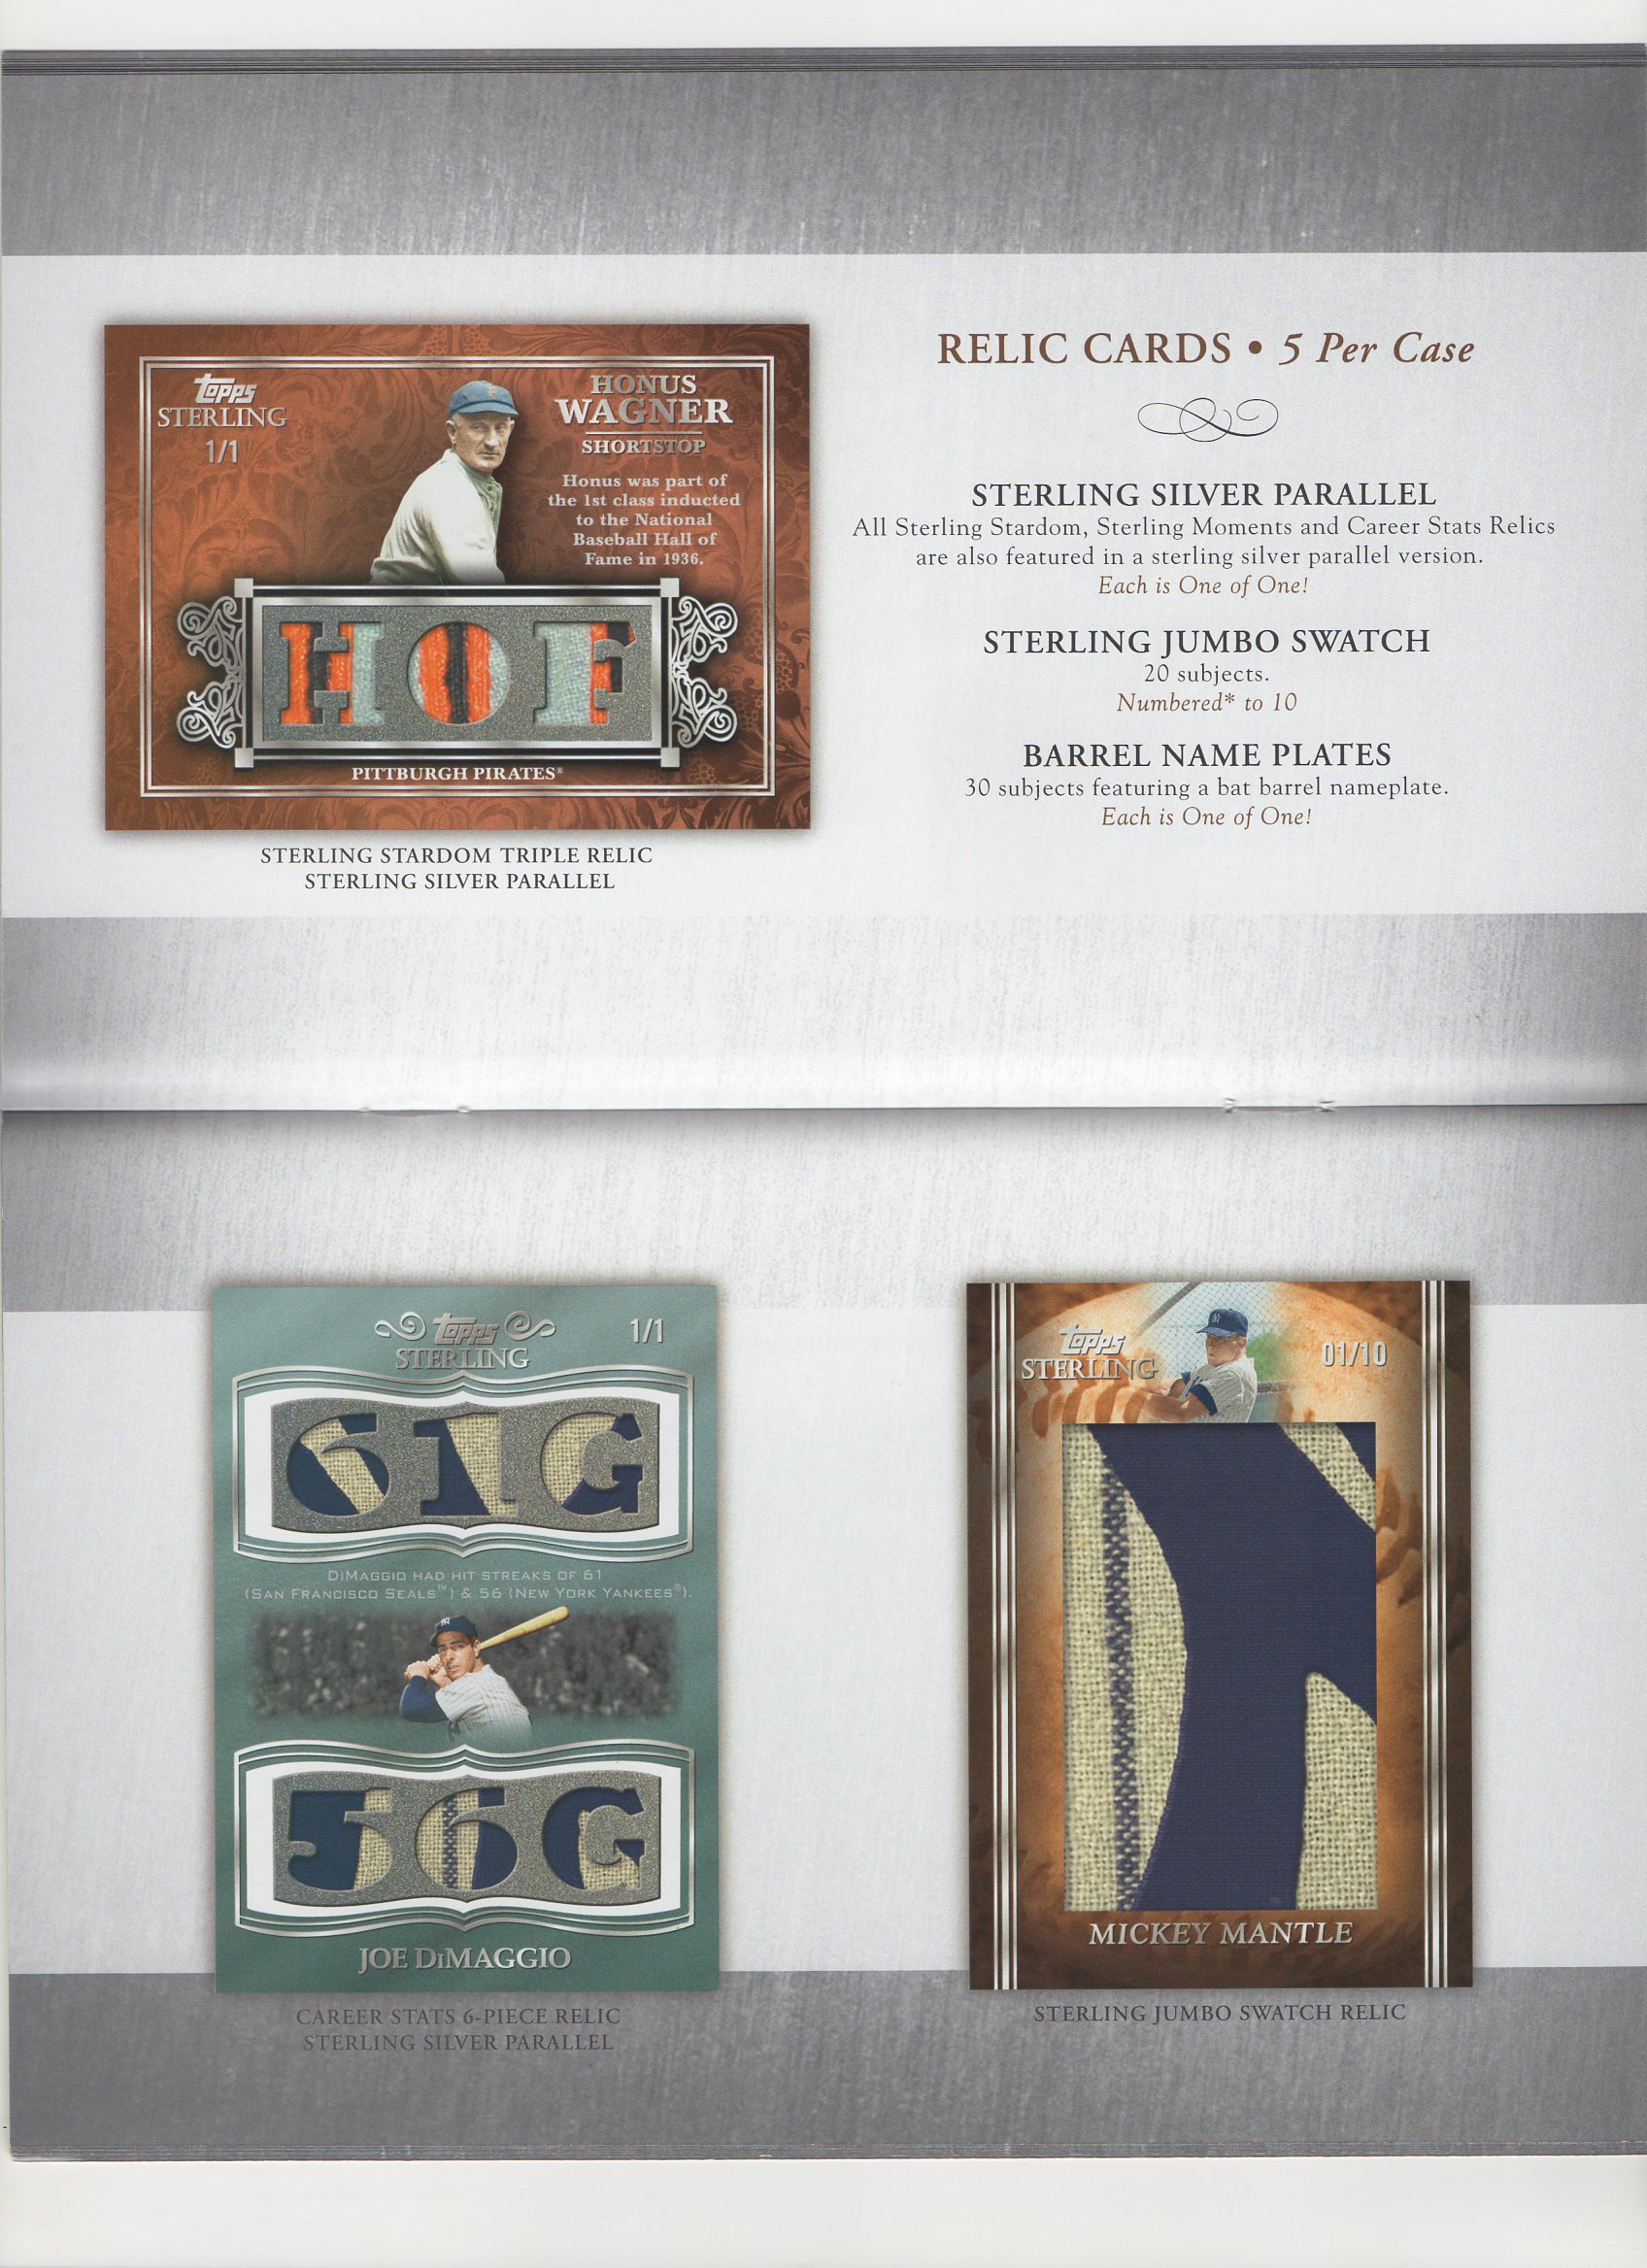 2008 topps sterling multipage booklet